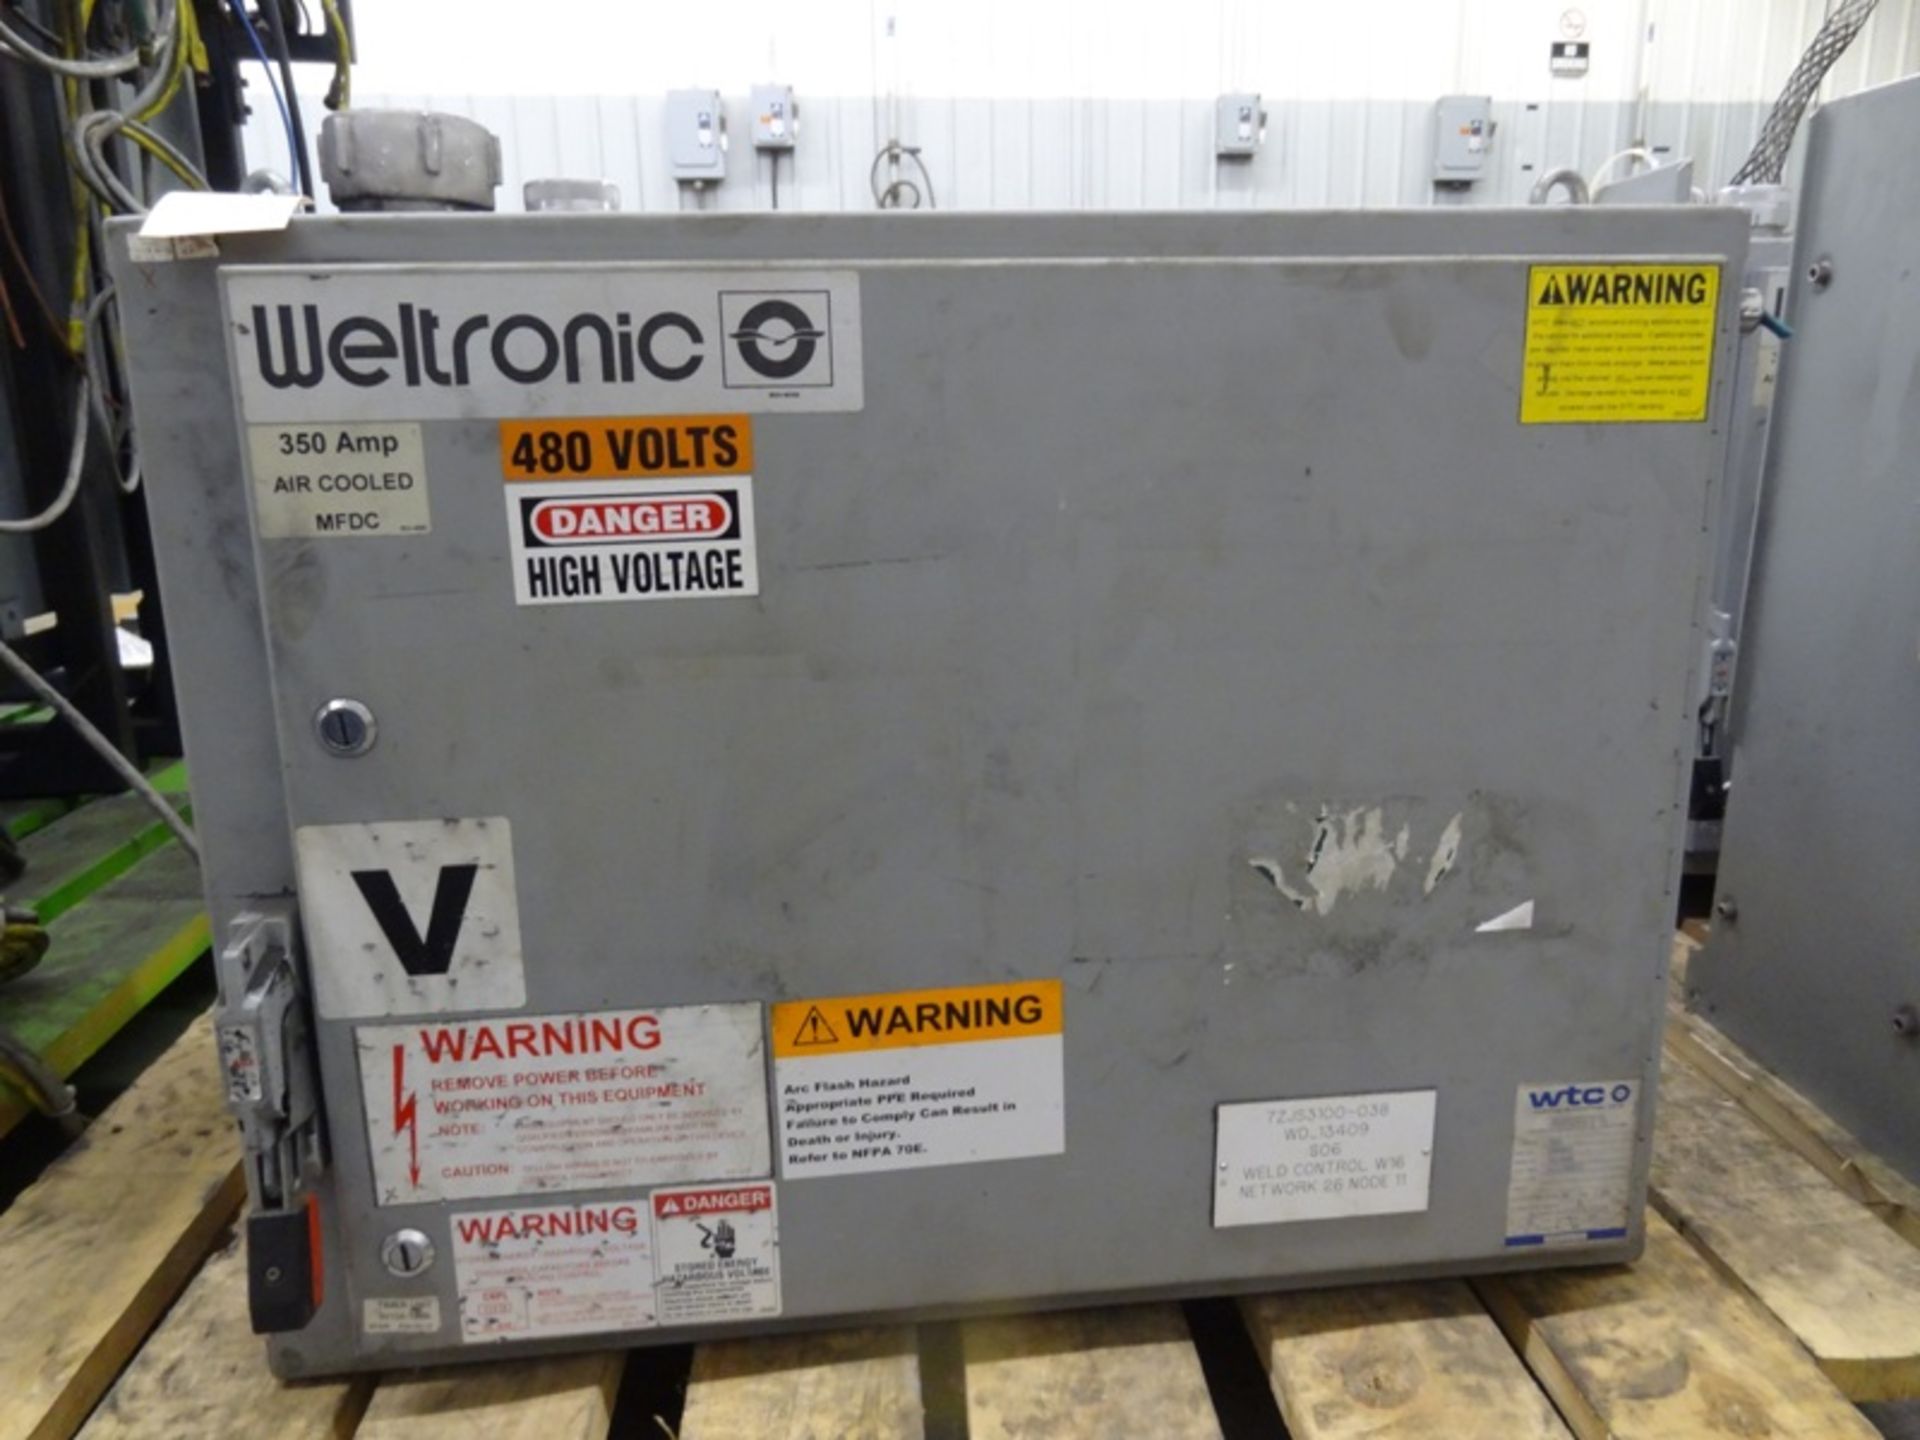 Weltronic 350 Amp Air Cooled MFDC Spot Weld Controller/Timer - Image 2 of 4